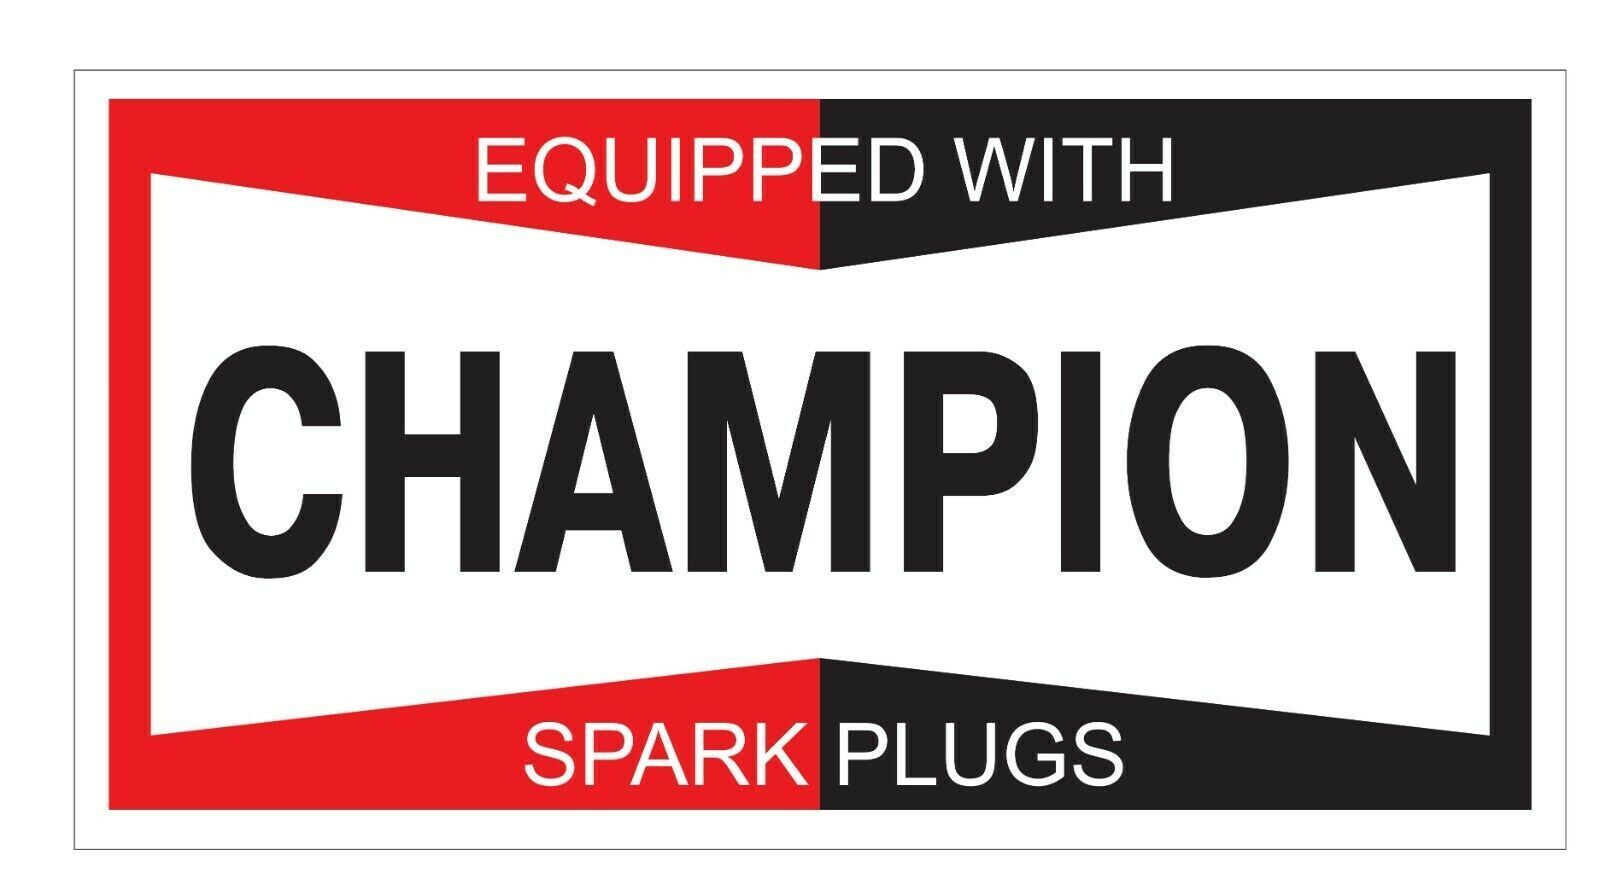 CHAMPION Spark Plugs Equipped Color Vinyl Decal Sticker Waterproof